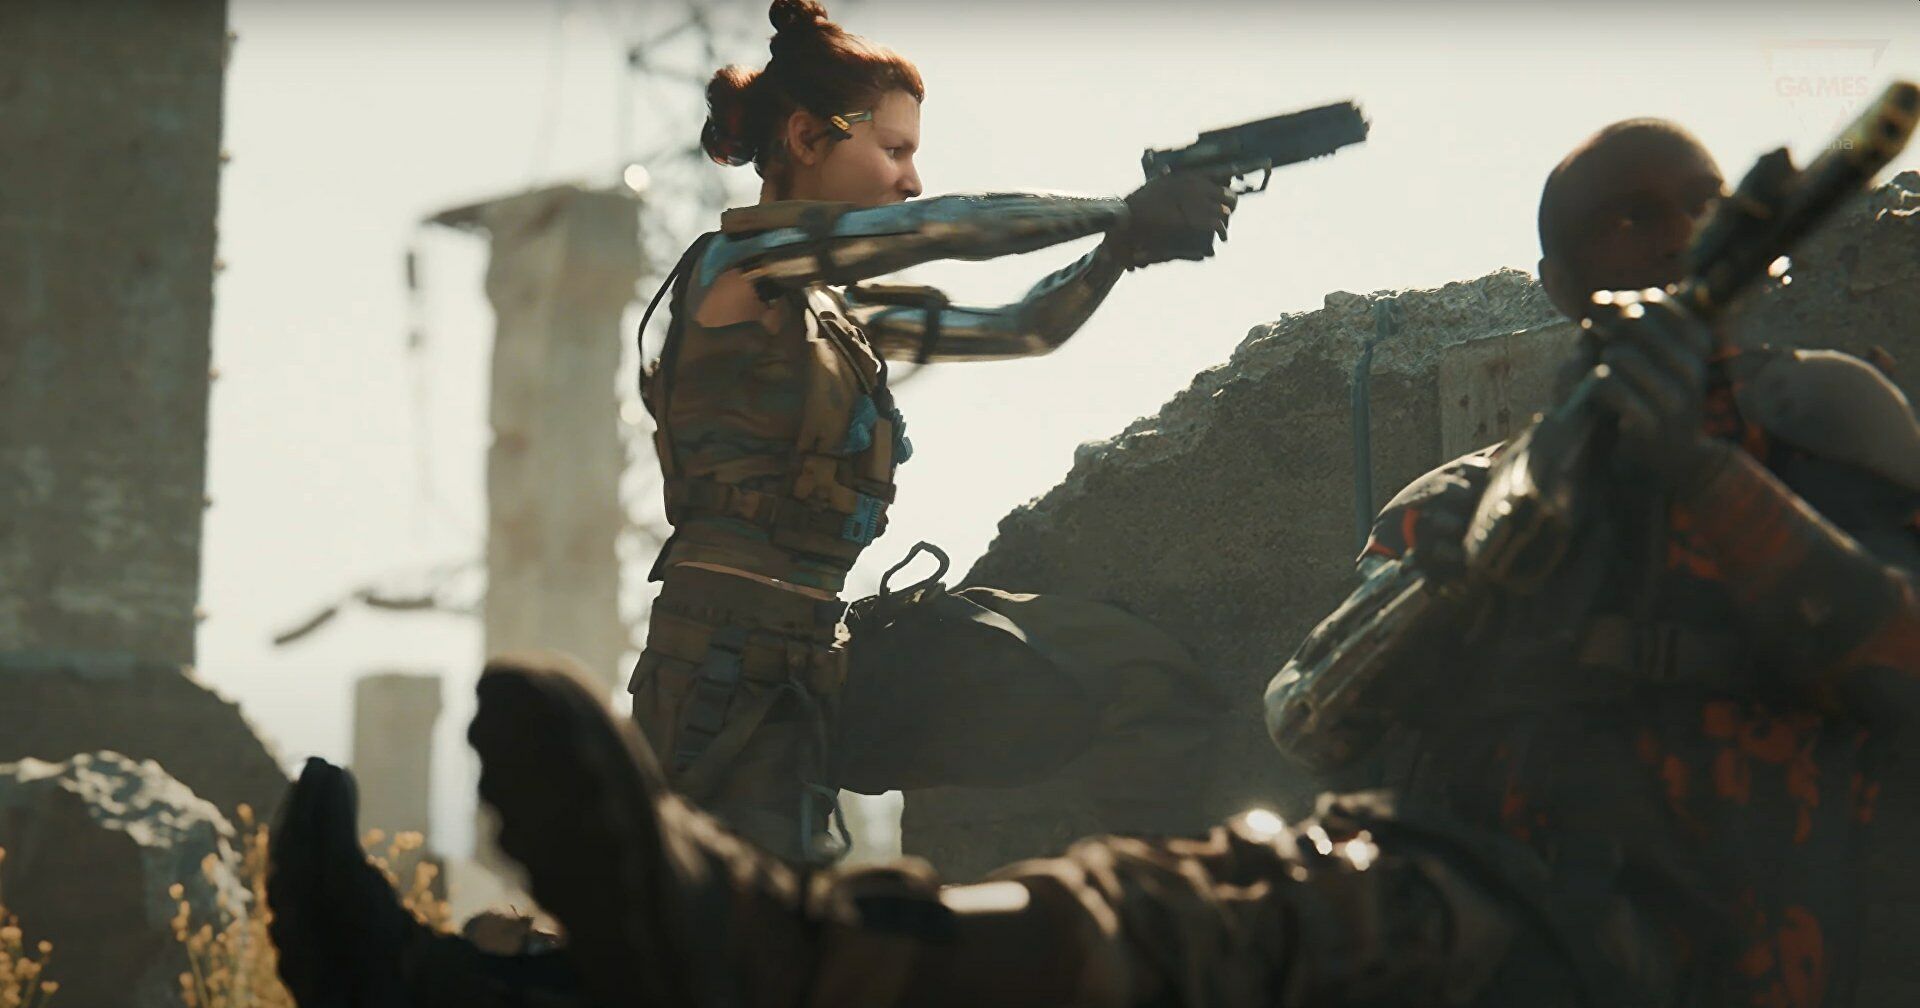 District 9 director’s battle royale game gets a new trailer, but relies on NFTs